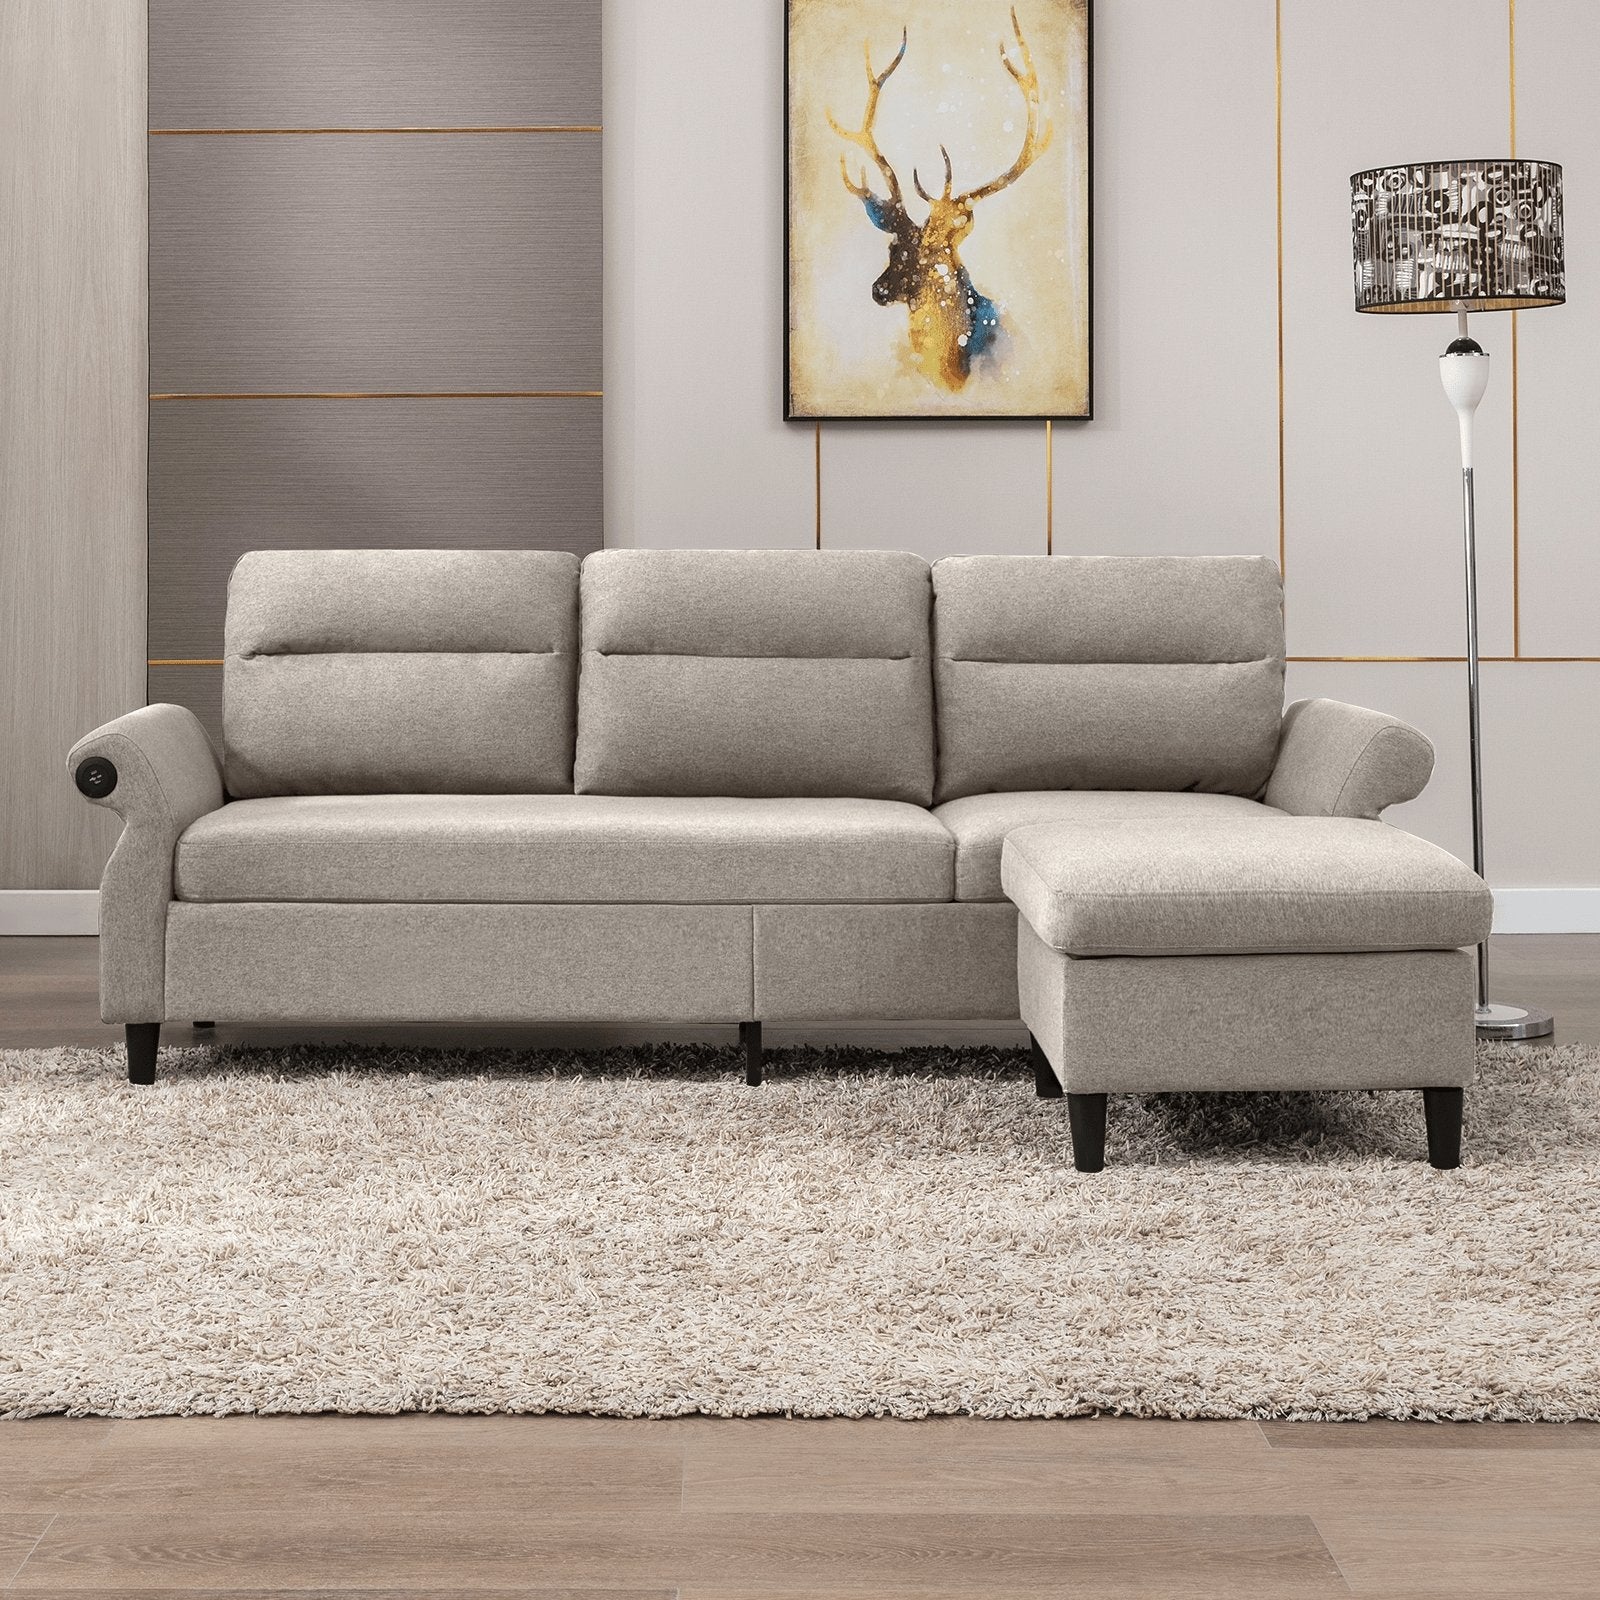 Convertible Sectional Sofa | 3 Seat Couch with 2 USB Ports and Adjustable Armrest - uenjoysectional sofa